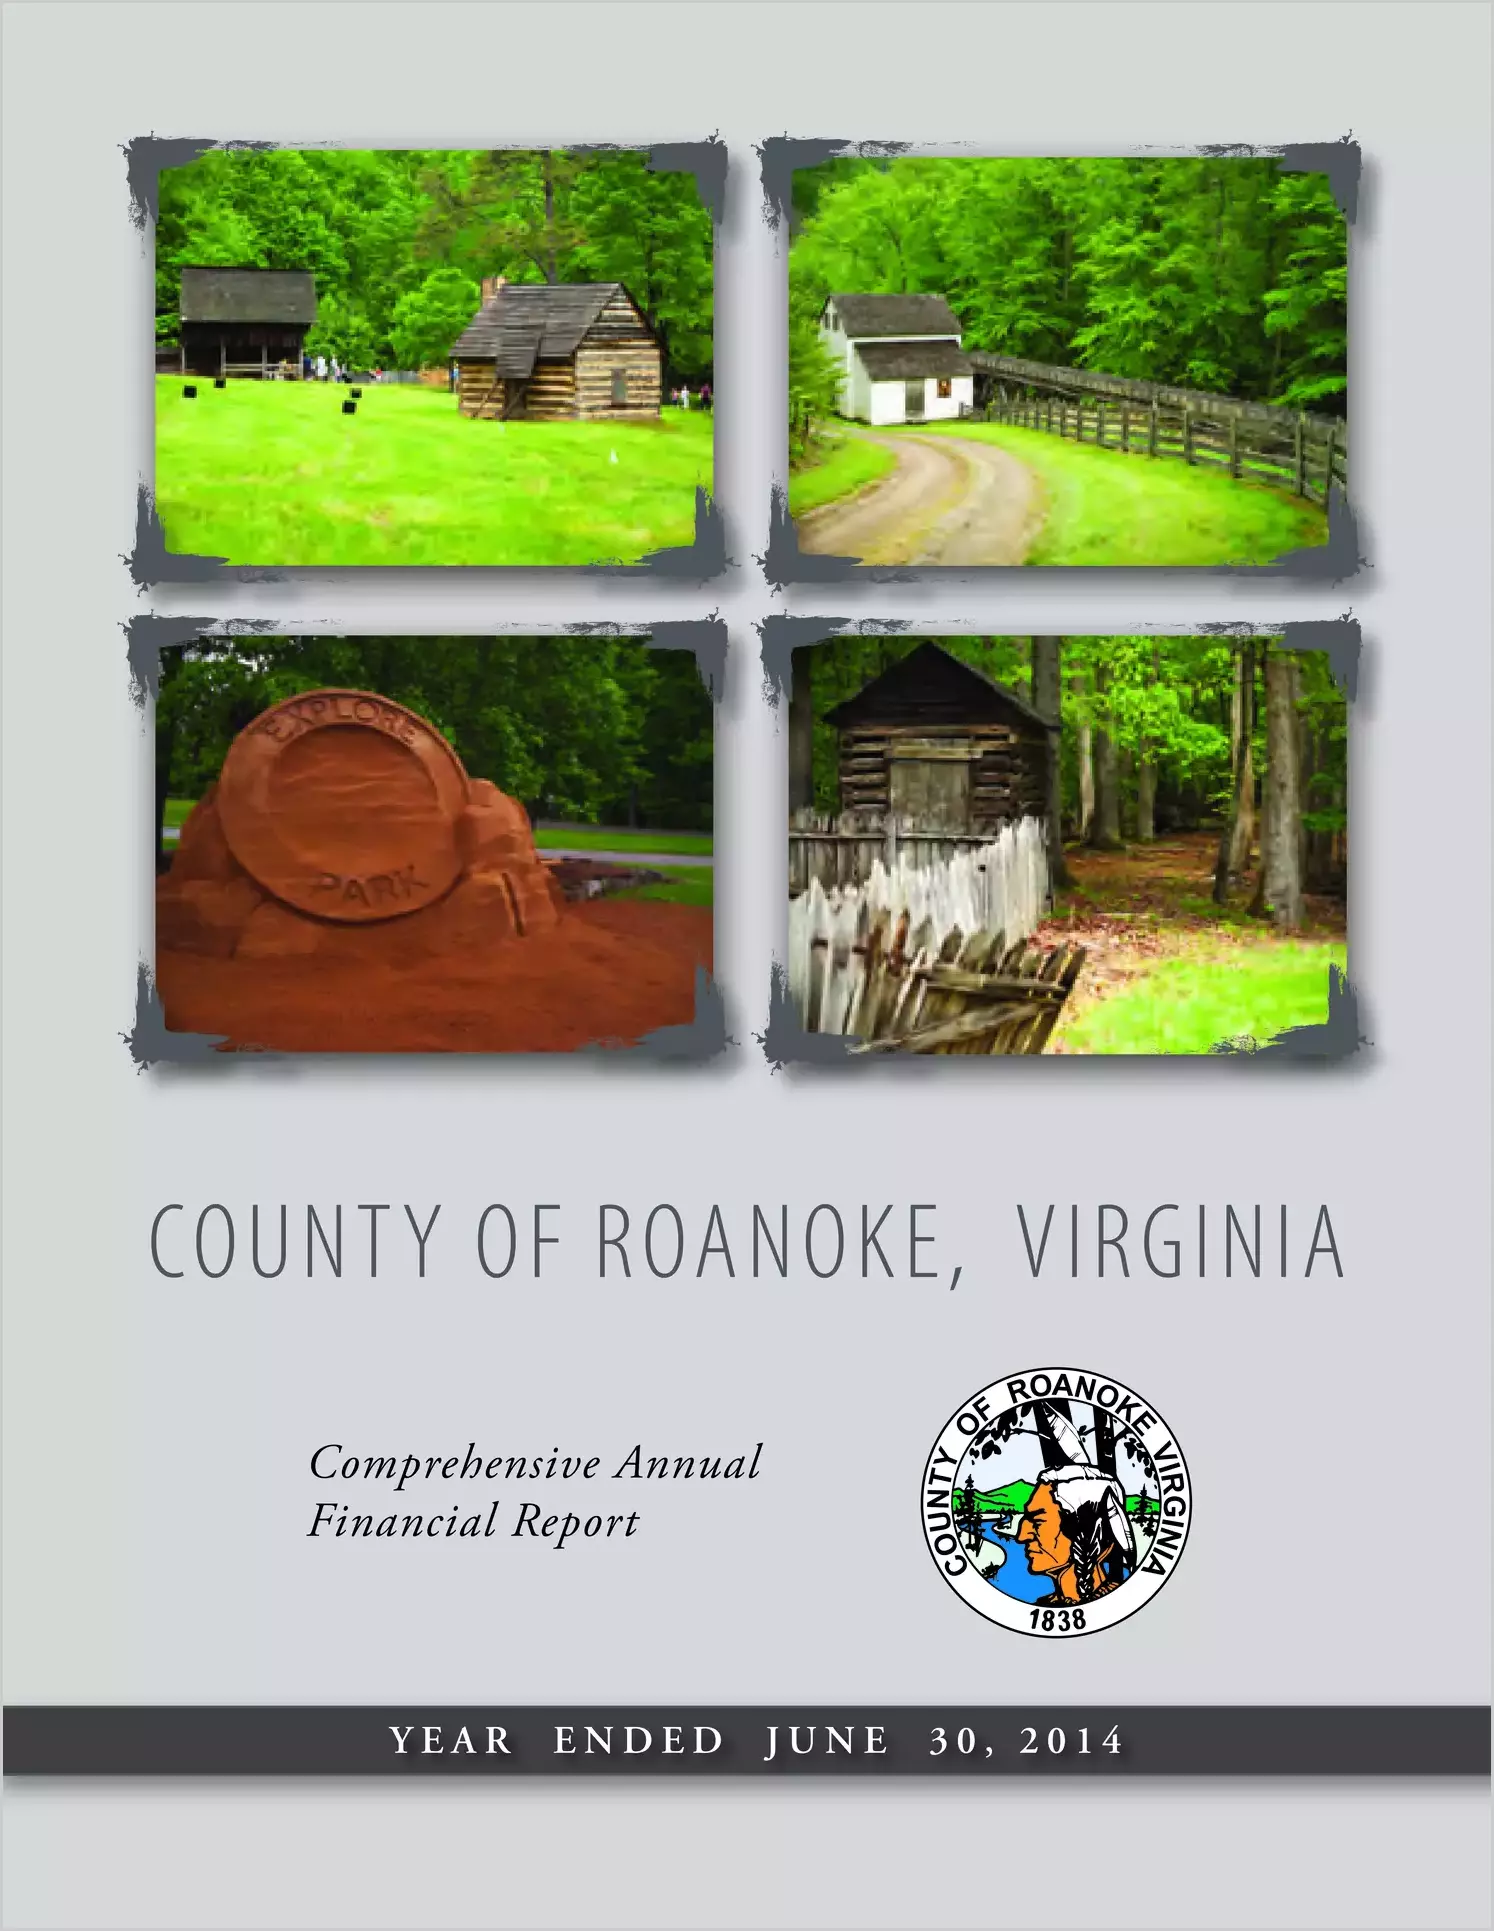 2014 Annual Financial Report for County of Roanoke